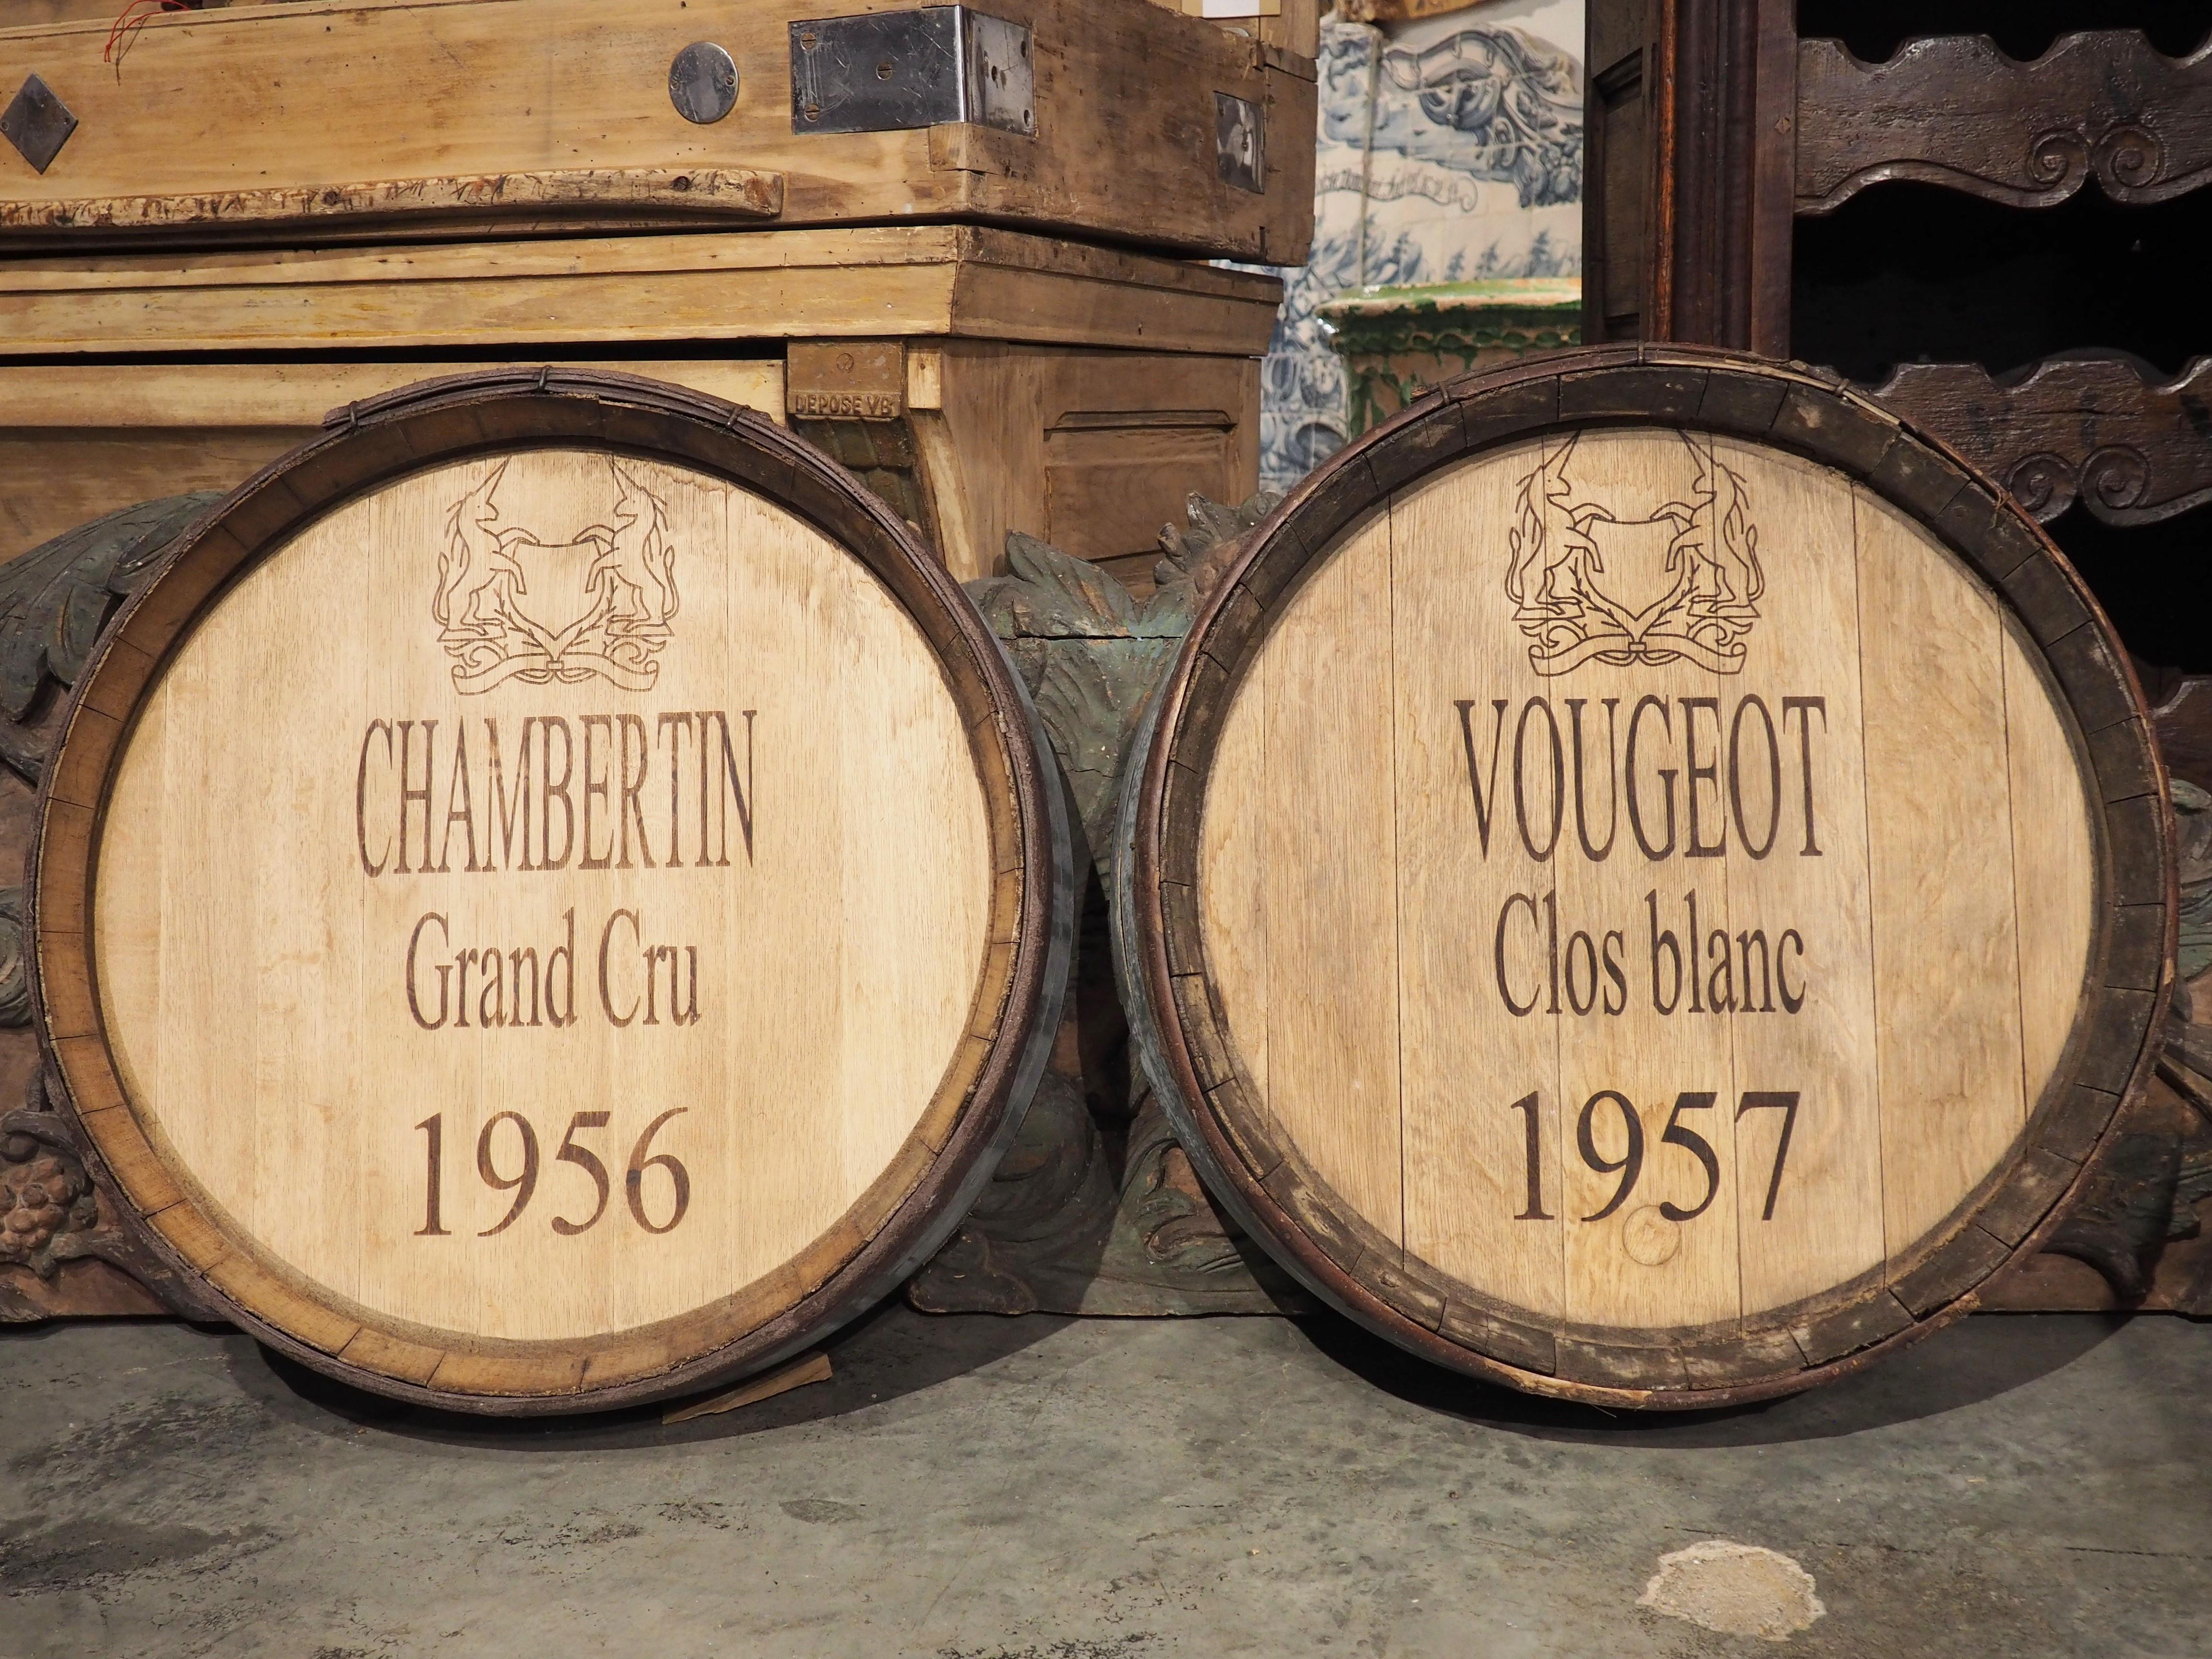 Originally parts of a 20th century French oak wine barrel, this pair of wine barrel heads have been repurposed into facades that are perfect wall-mounted accessories for a bar room. Both facades have been painted more recently with appellations and